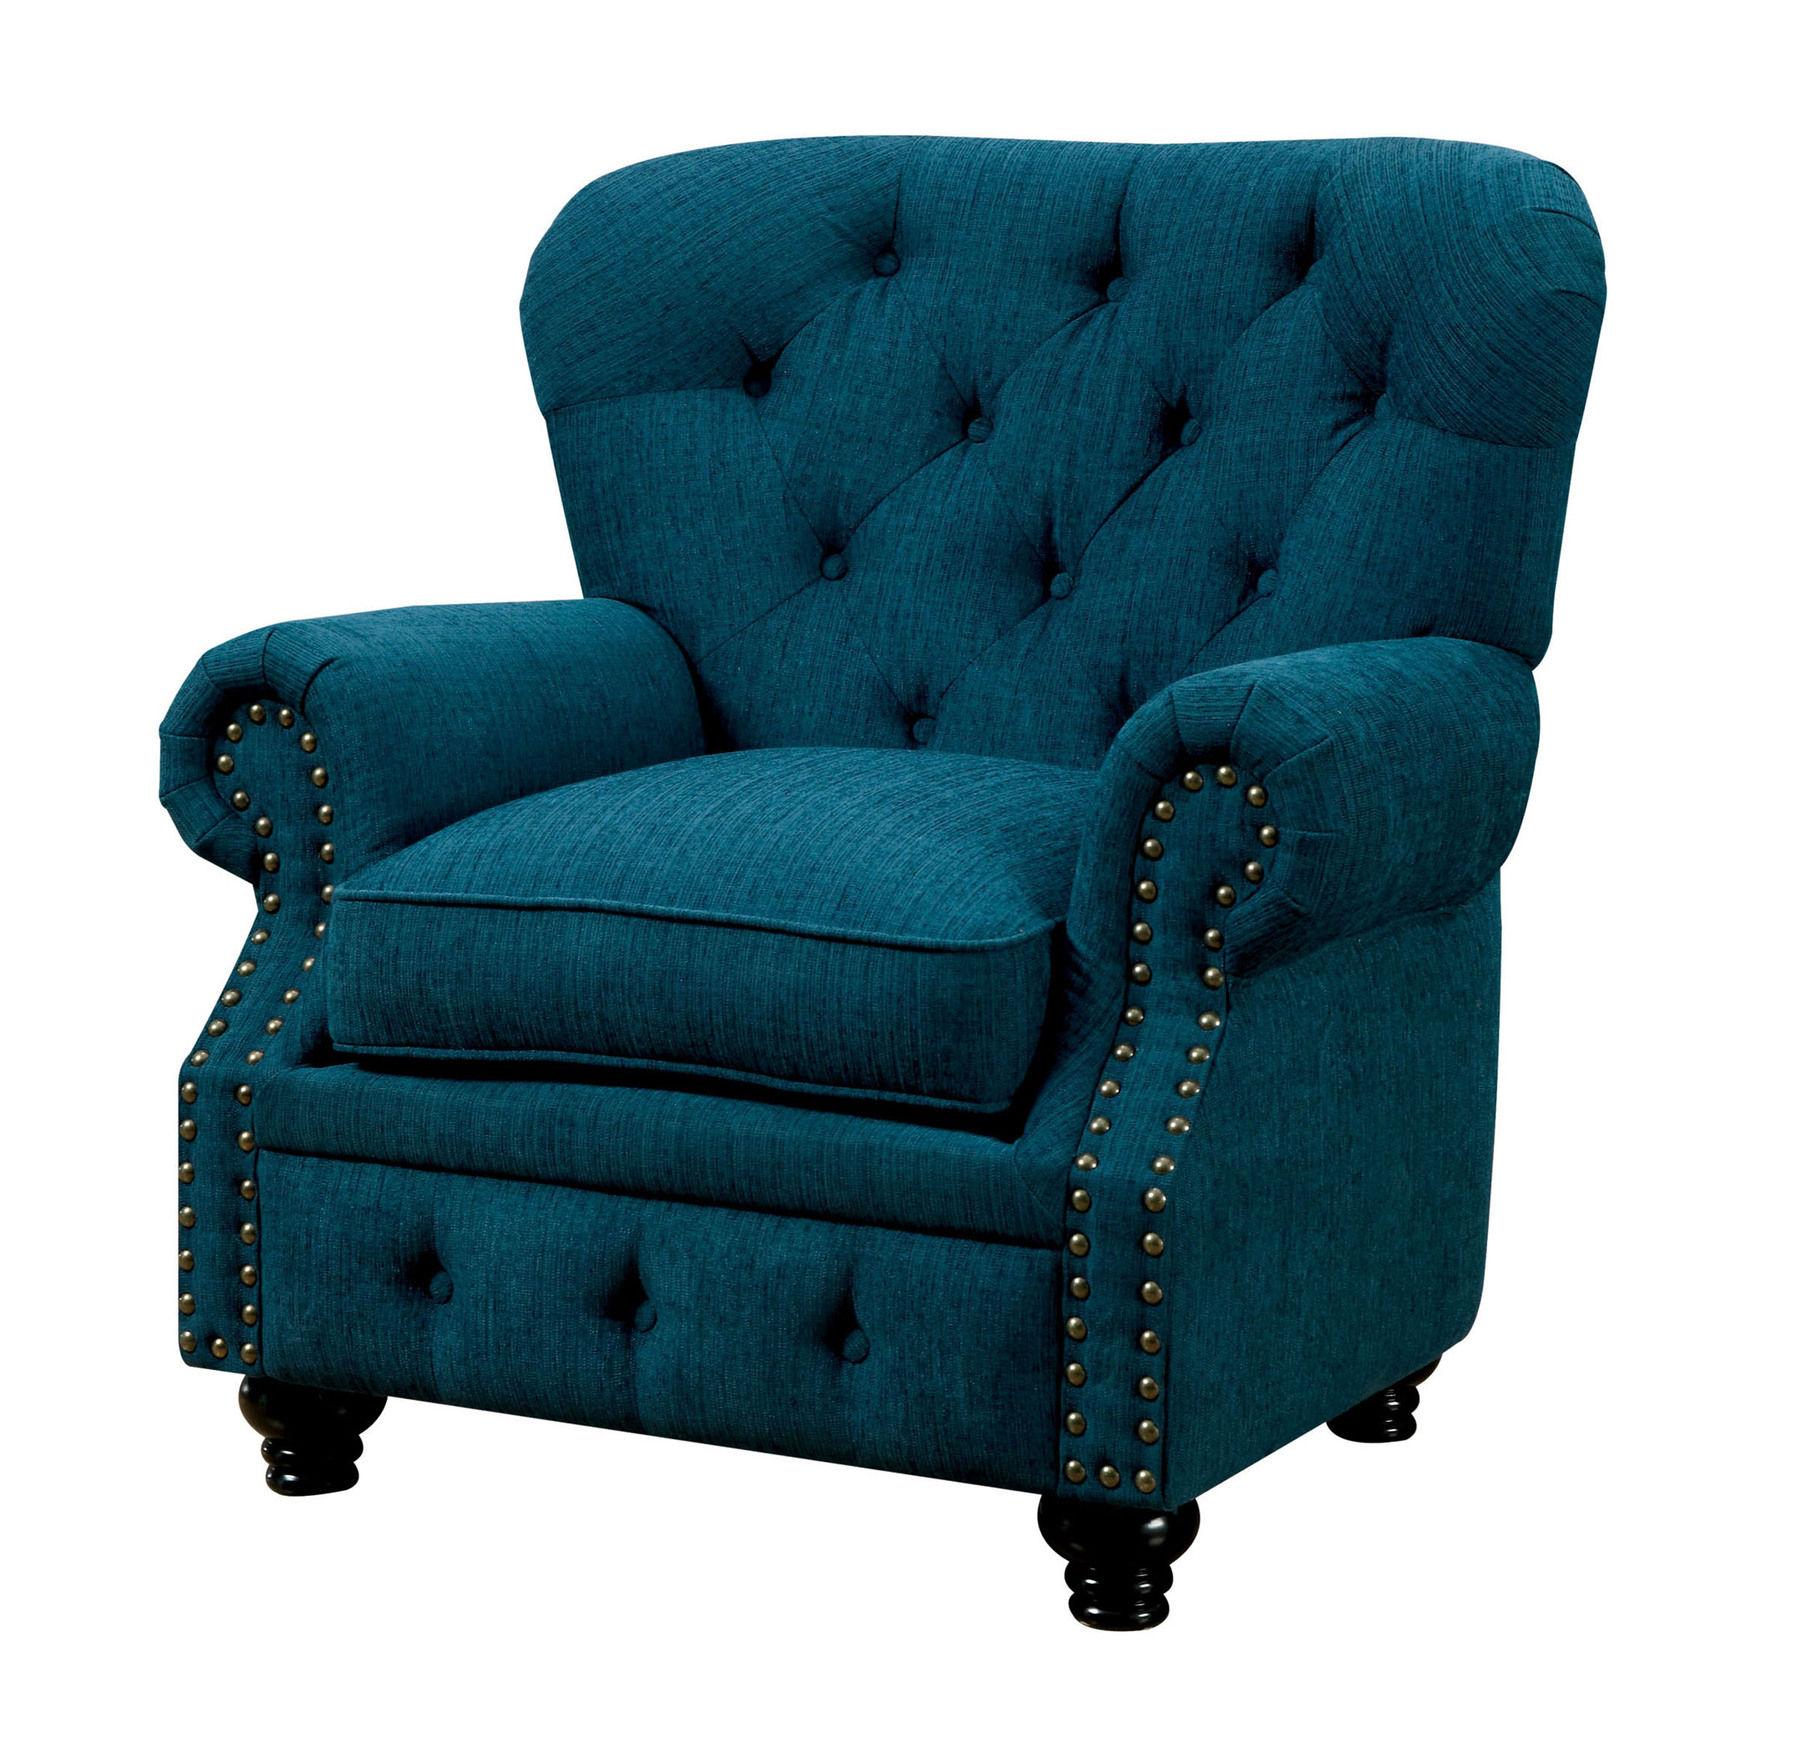 Transitional Arm Chair CM6269TL-CH Stanford CM6269TL-CH in Teal 